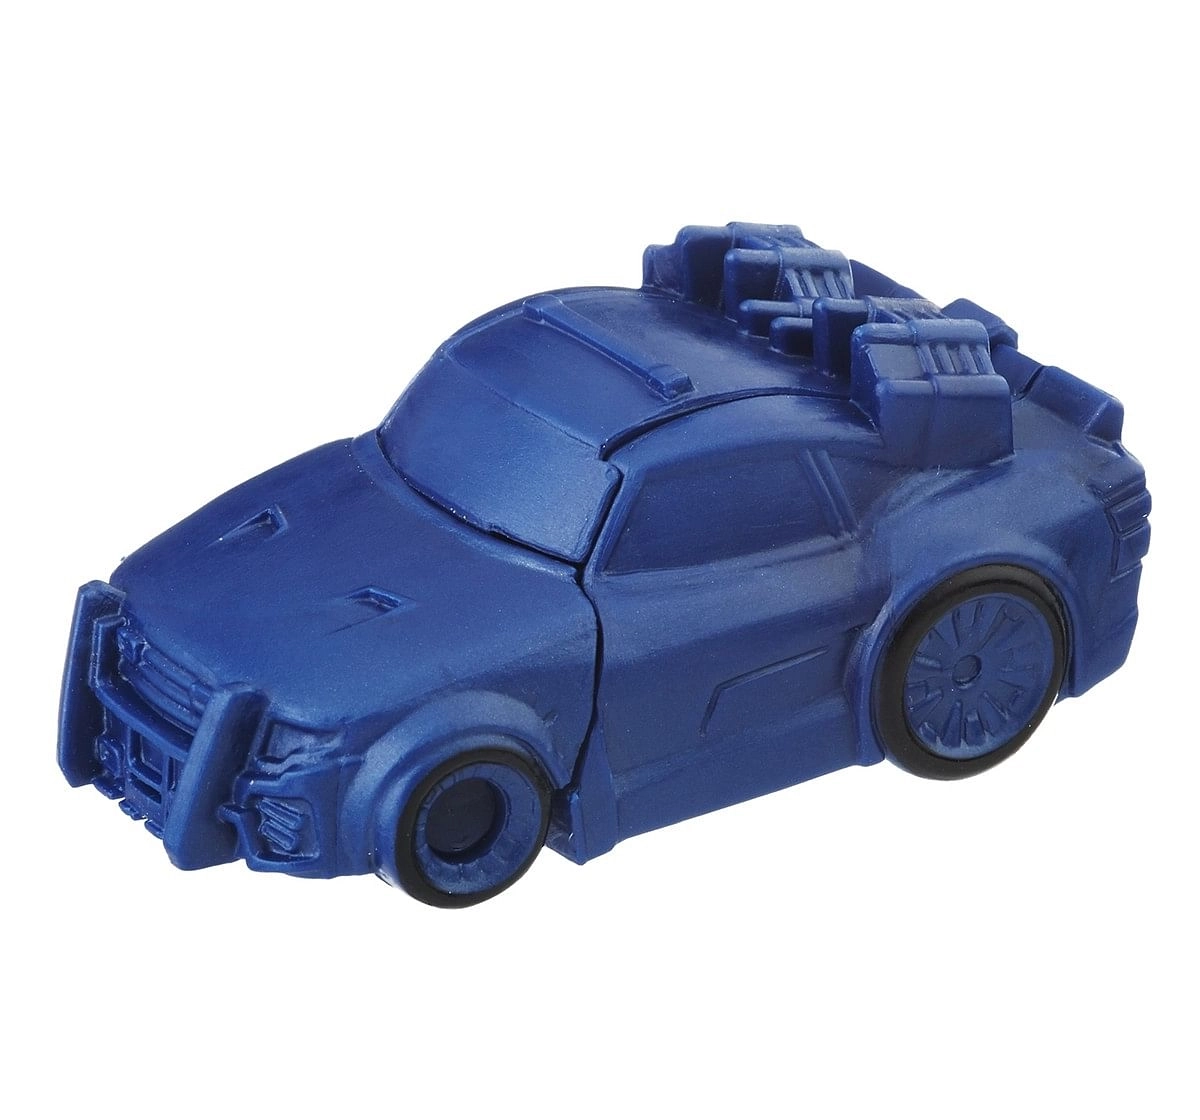 Transformers The Last Knight Tiny Turbo Changers Series 1 Blind Bag,  7Y+ (Multicolor)